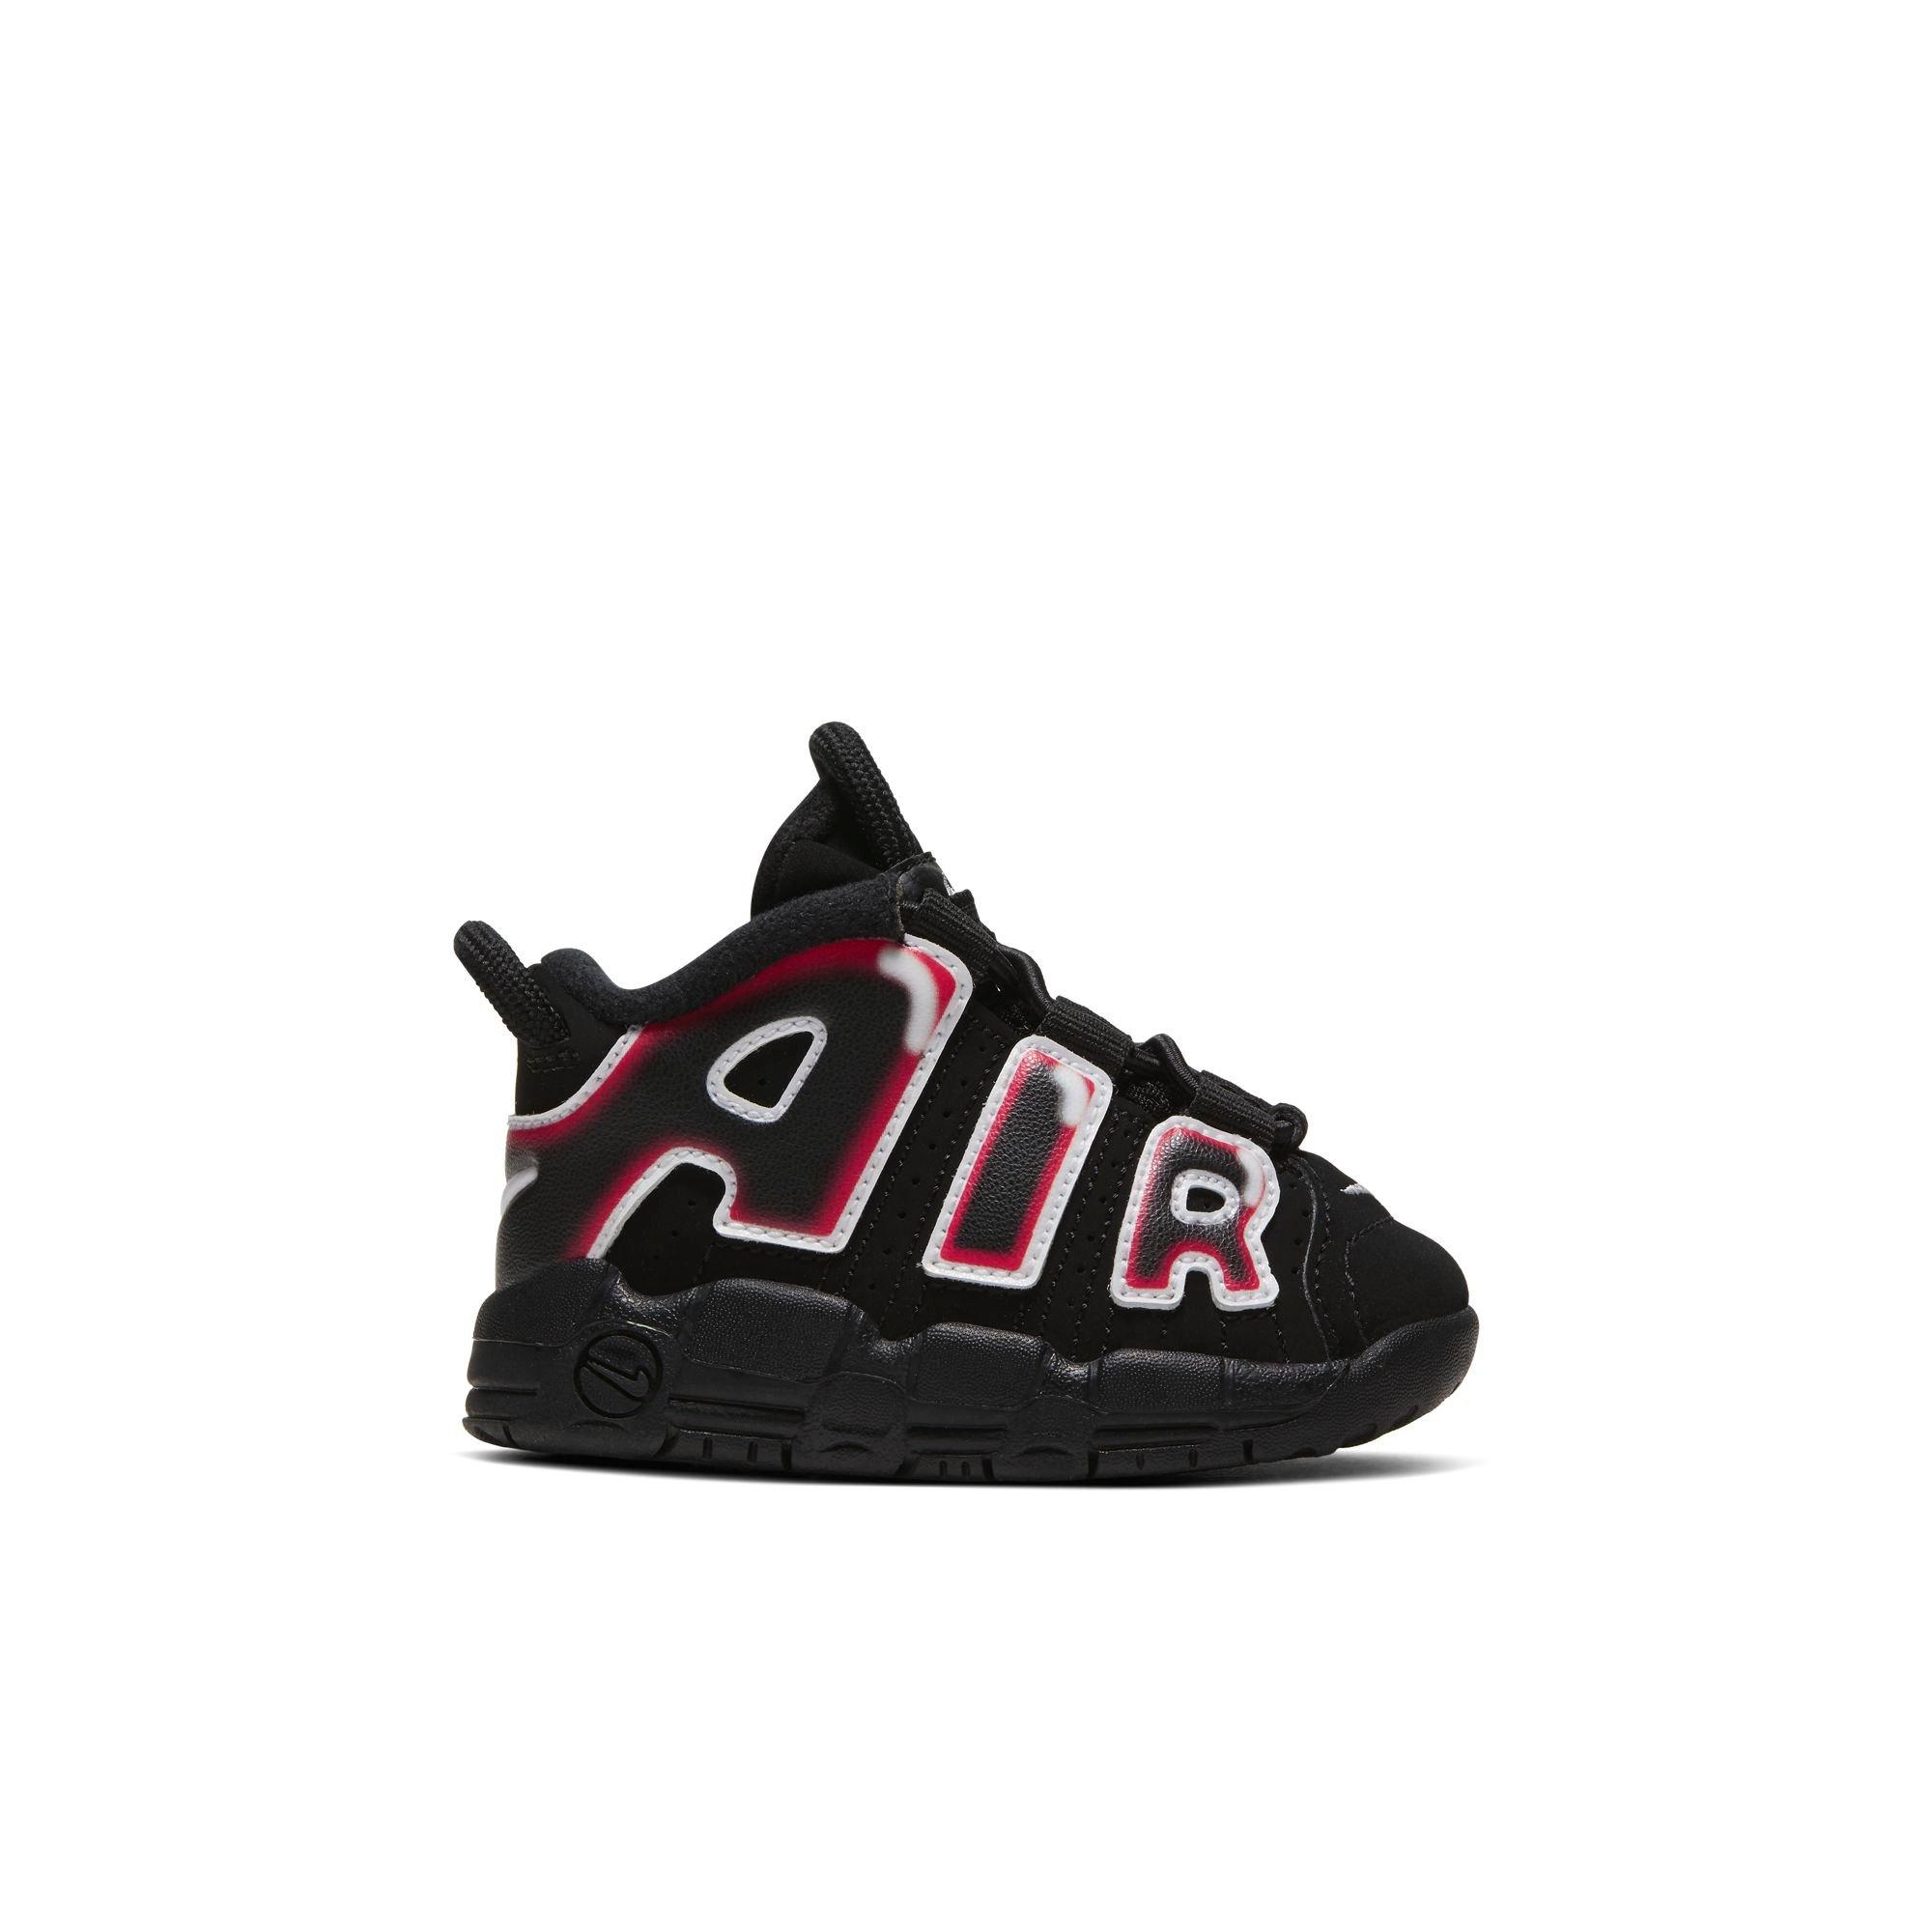 uptempo for toddlers cheap online